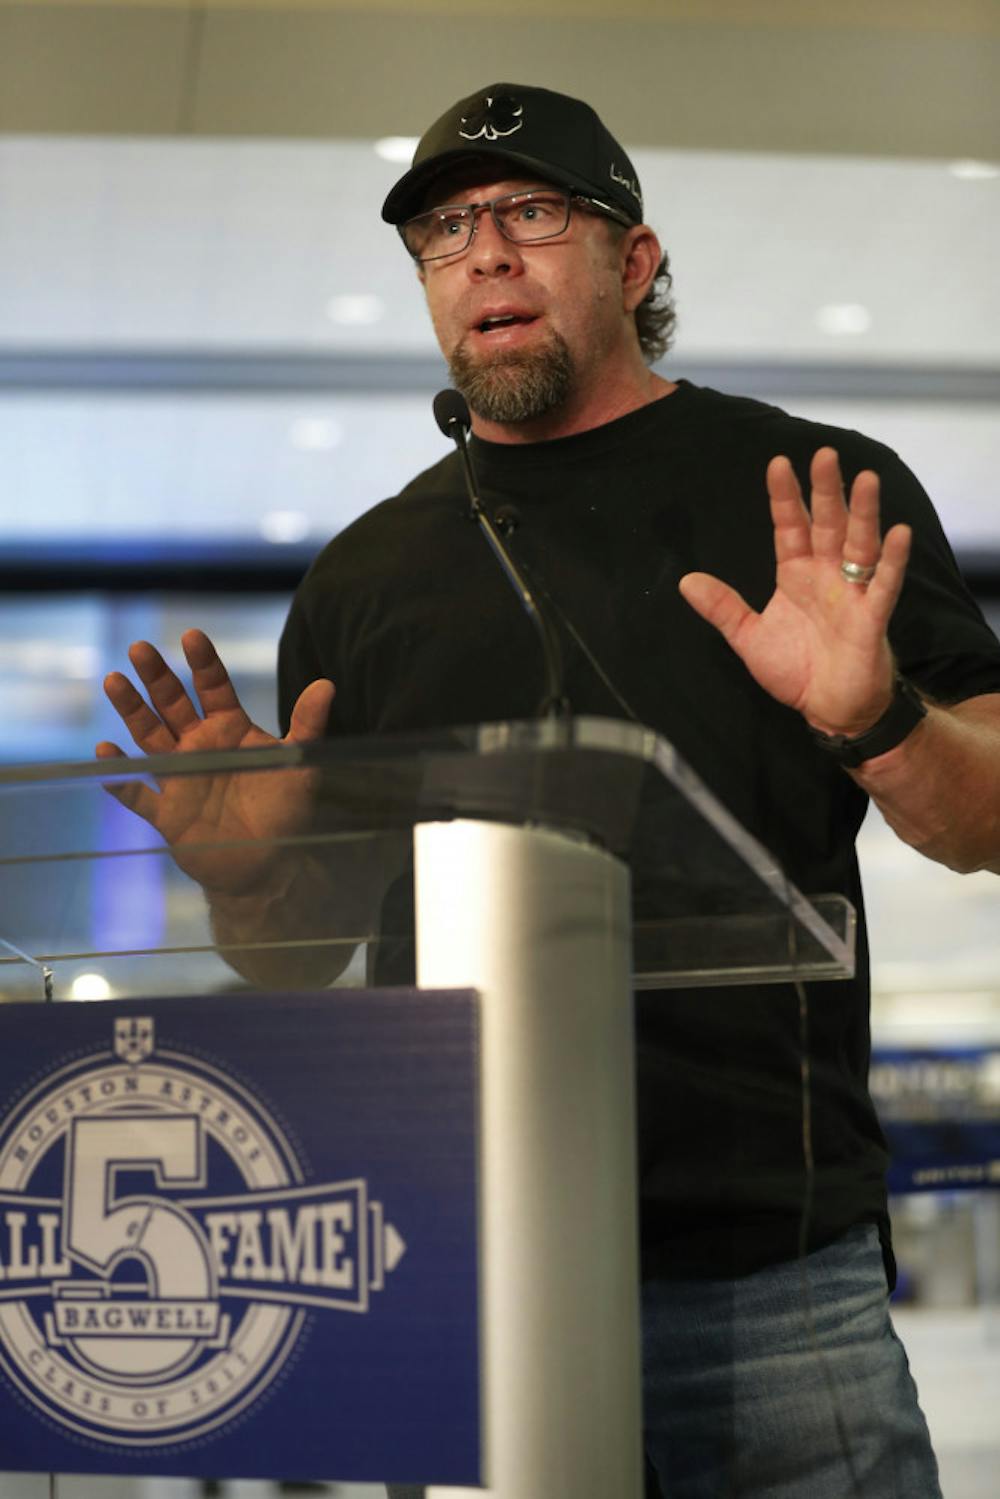 <p>Former Houston Astros first baseman Jeff Bagwell speaks to reporters Wednesday Jan. 18, 2017, in Houston, after his election to baseball's Hall of Fame was announced. (Karen Warren/Houston Chronicle via AP)</p>